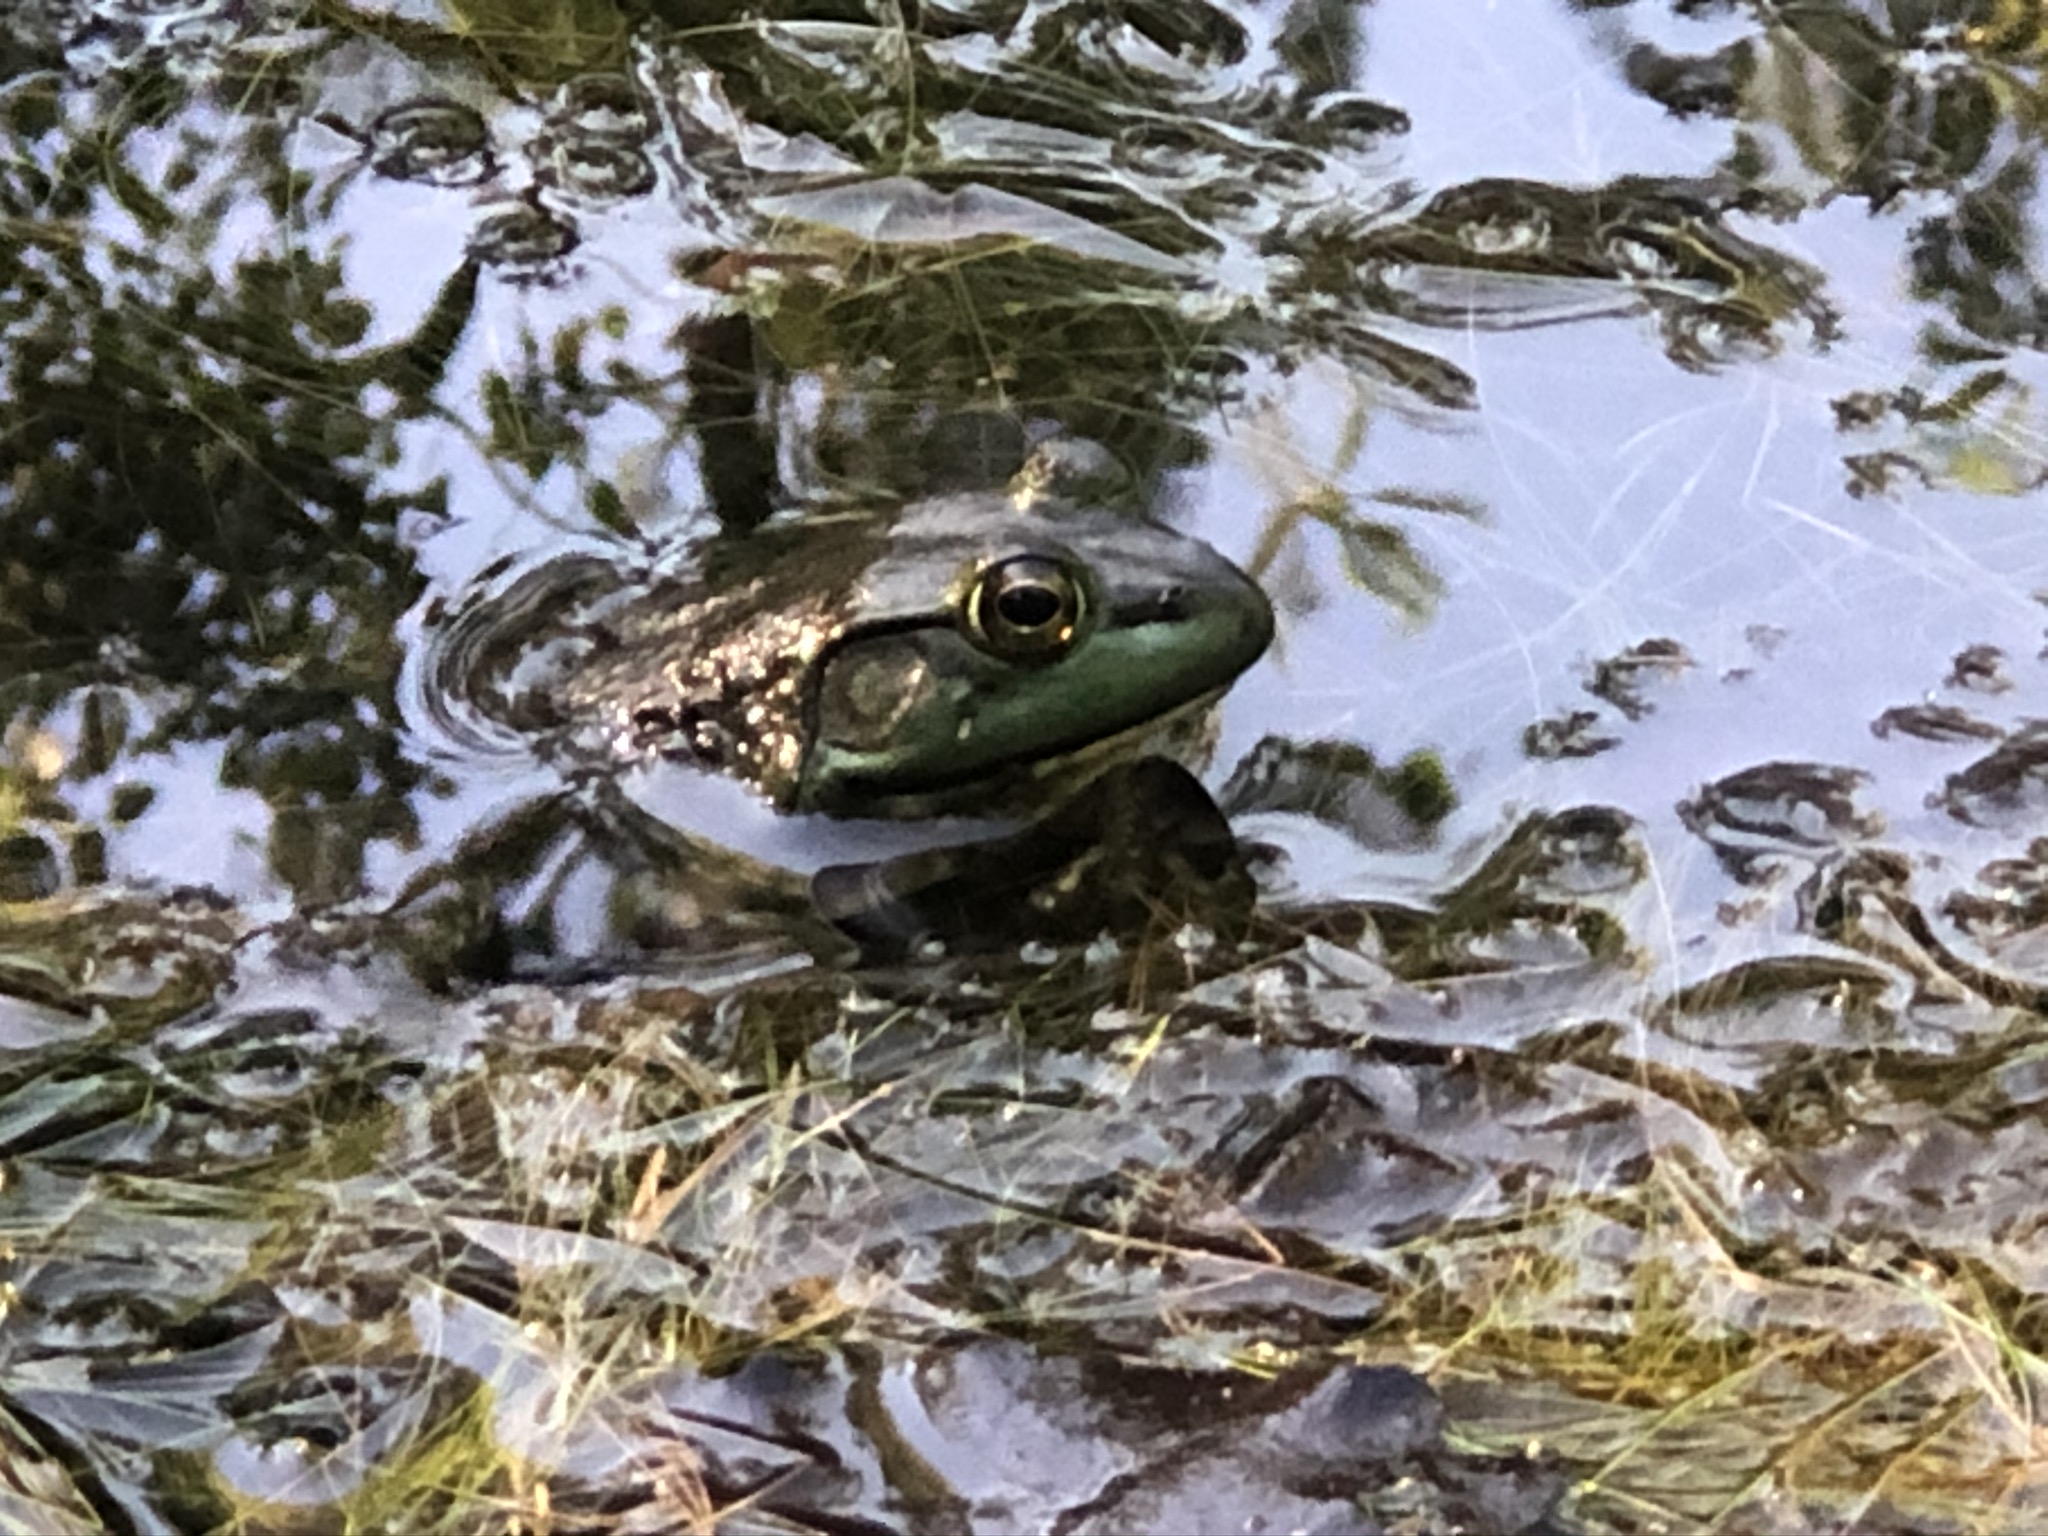 a smaller large frog